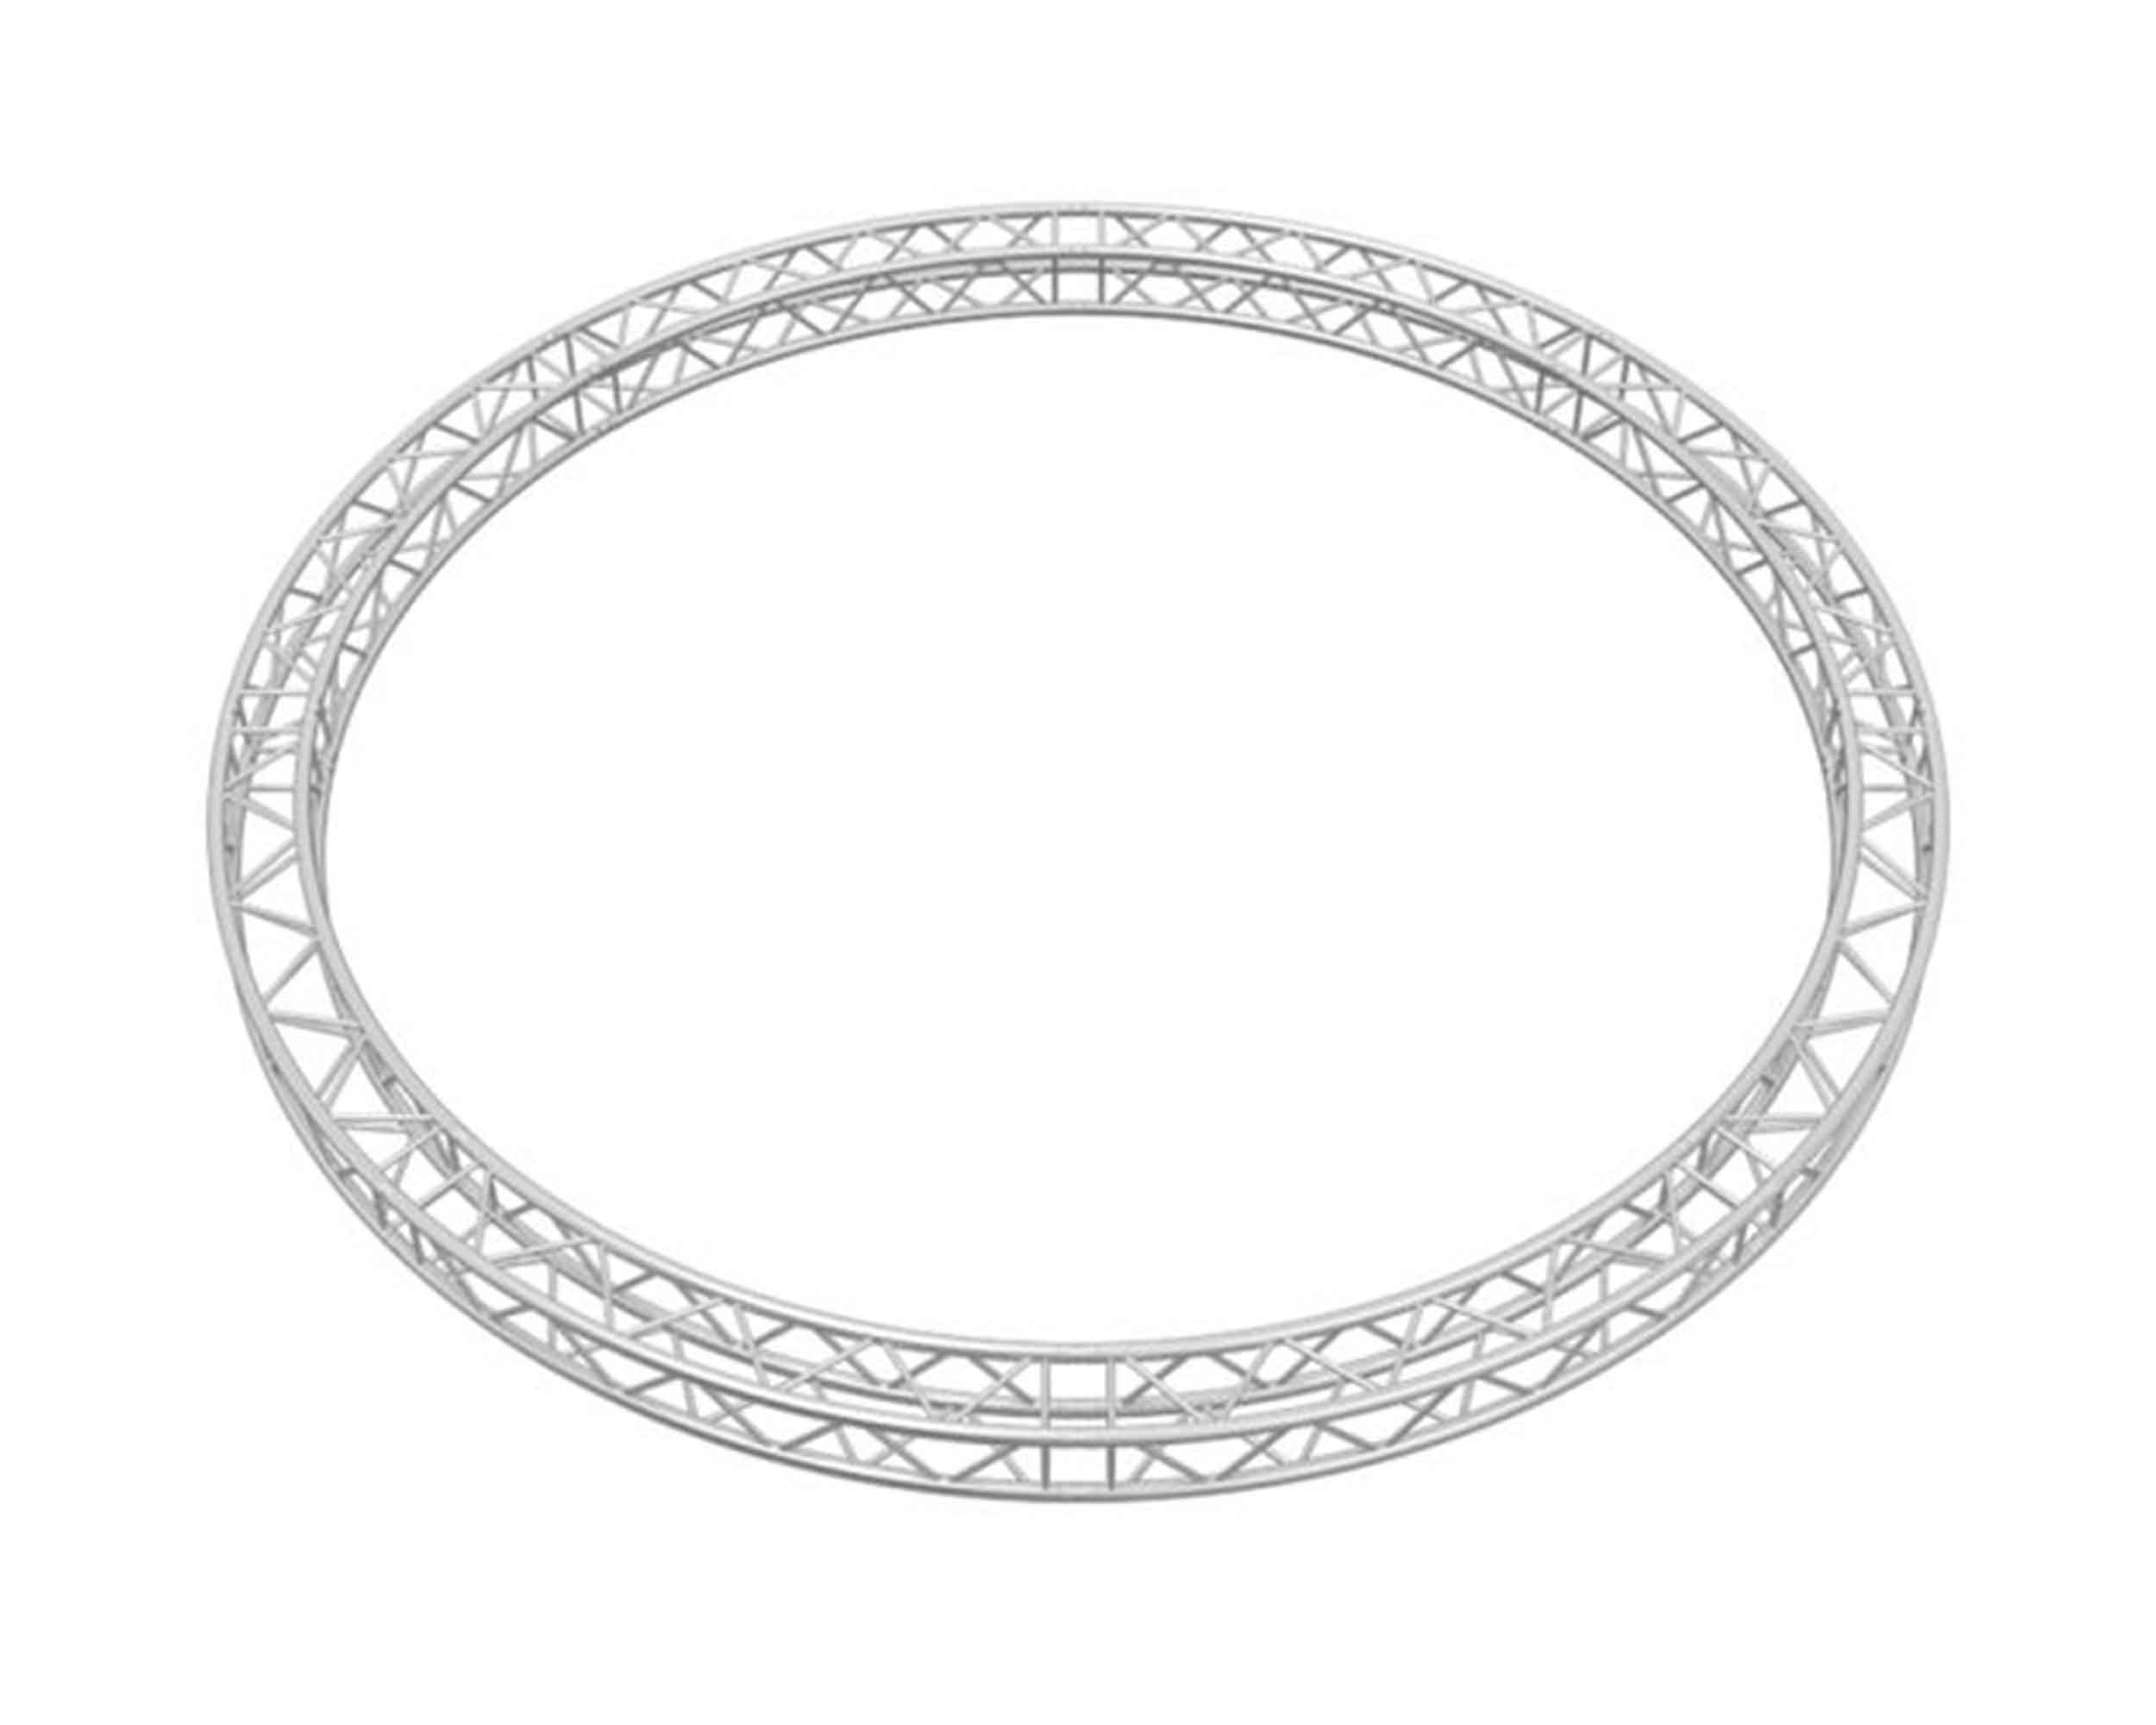 Global Truss SQ-C7-ARC45 One Single Part of Eight that Create 1 Full SQ-C7 Circle by Global Truss